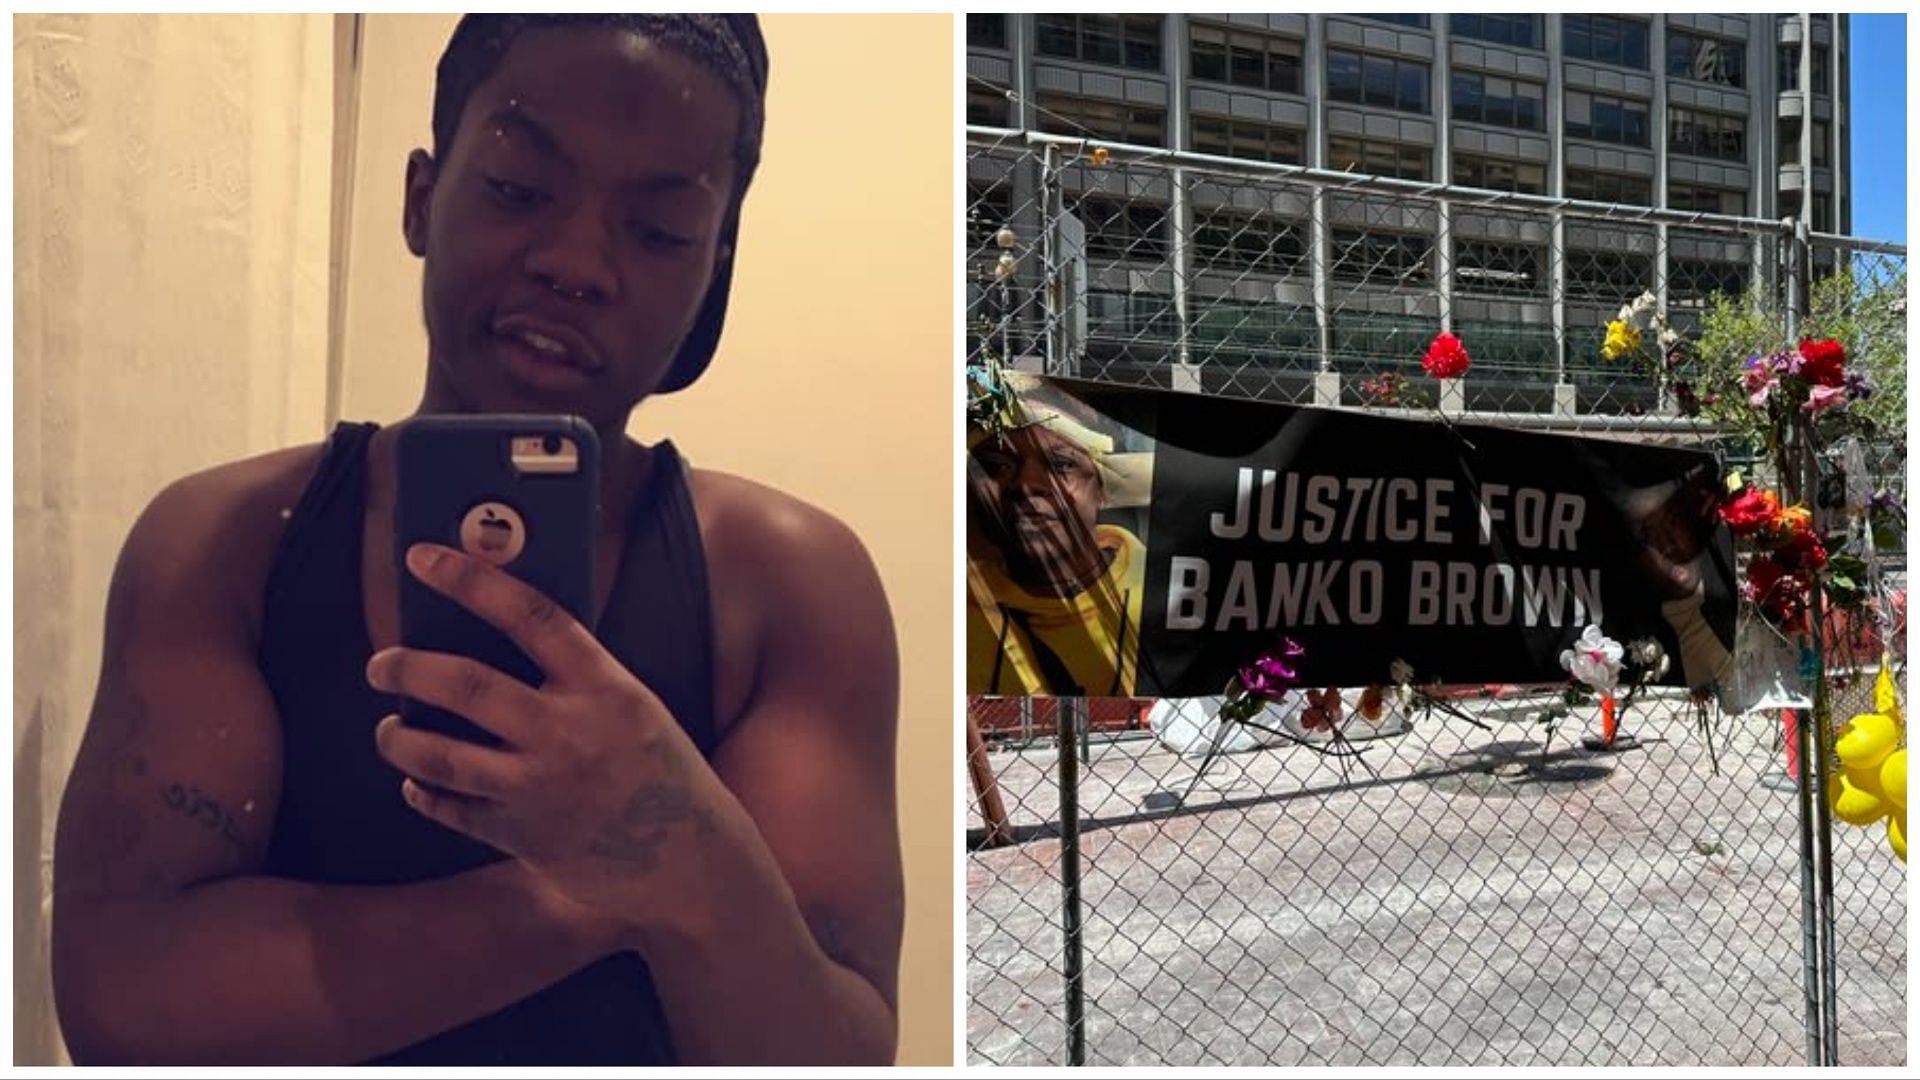 Banko Brown was fatally shot by a Walgreens security guard, (Images via Sam Levin and Christina DiEdoardo/Twitter)